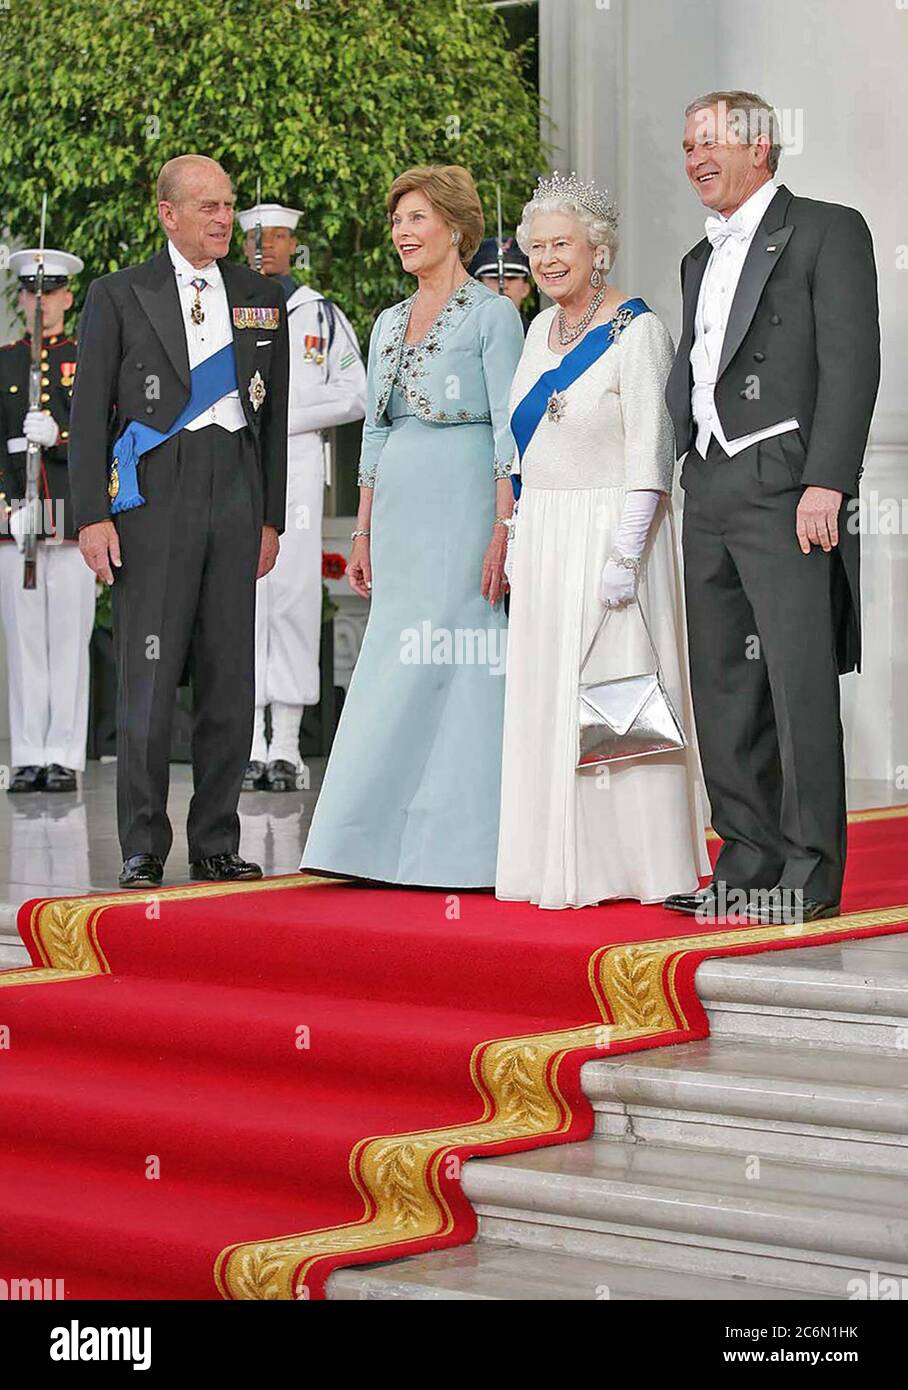 President George W. Bush and Mrs. Laura Bush welcome Her Majesty Queen Elizabeth II and His Royal Highness The Prince Philip, Duke of Edinburgh, Monday, May 7, 2007, upon their arrival to the North Portico of the White House for a State Dinner in their honor.  Photo by Eric Draper, Courtesy of the George W. Bush Presidential Library and Museum Stock Photo